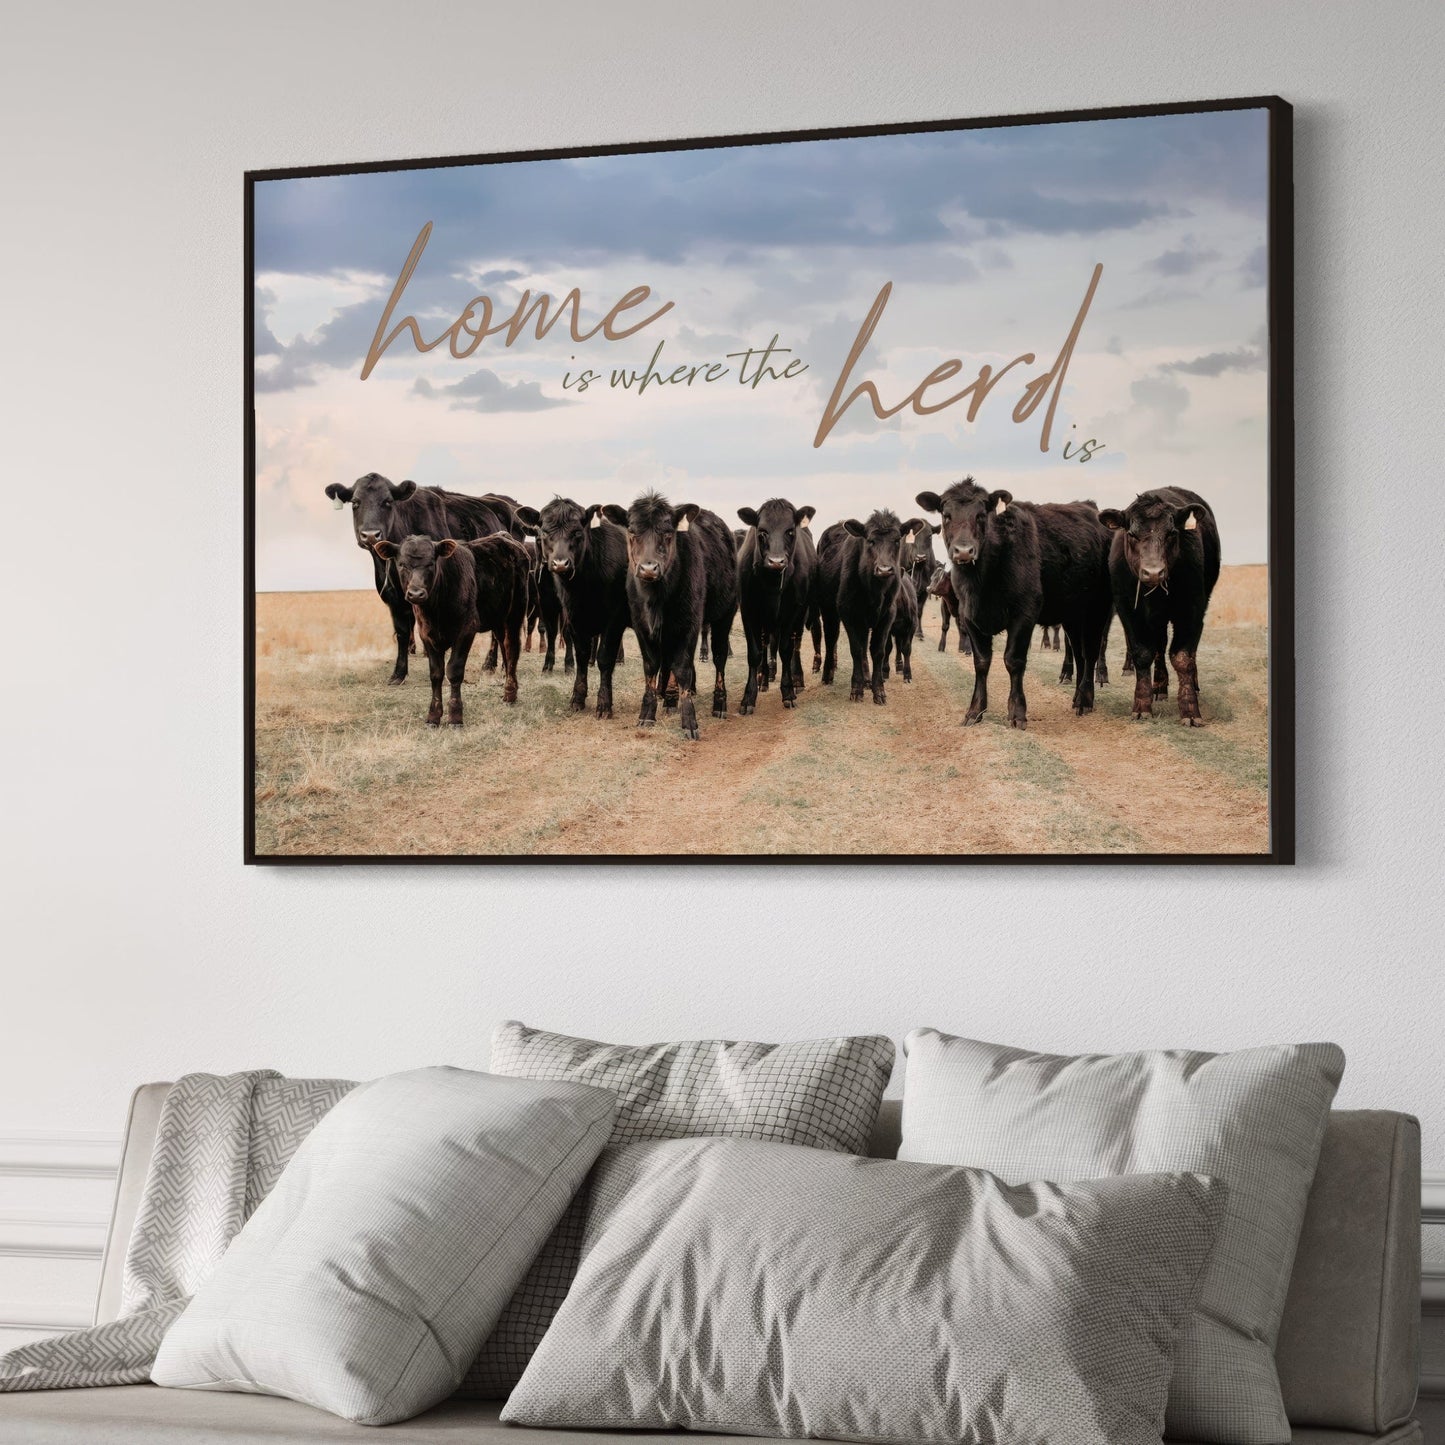 Home is Where the Herd Is - Black Angus Inspirational Canvas Wall Art Teri James Photography